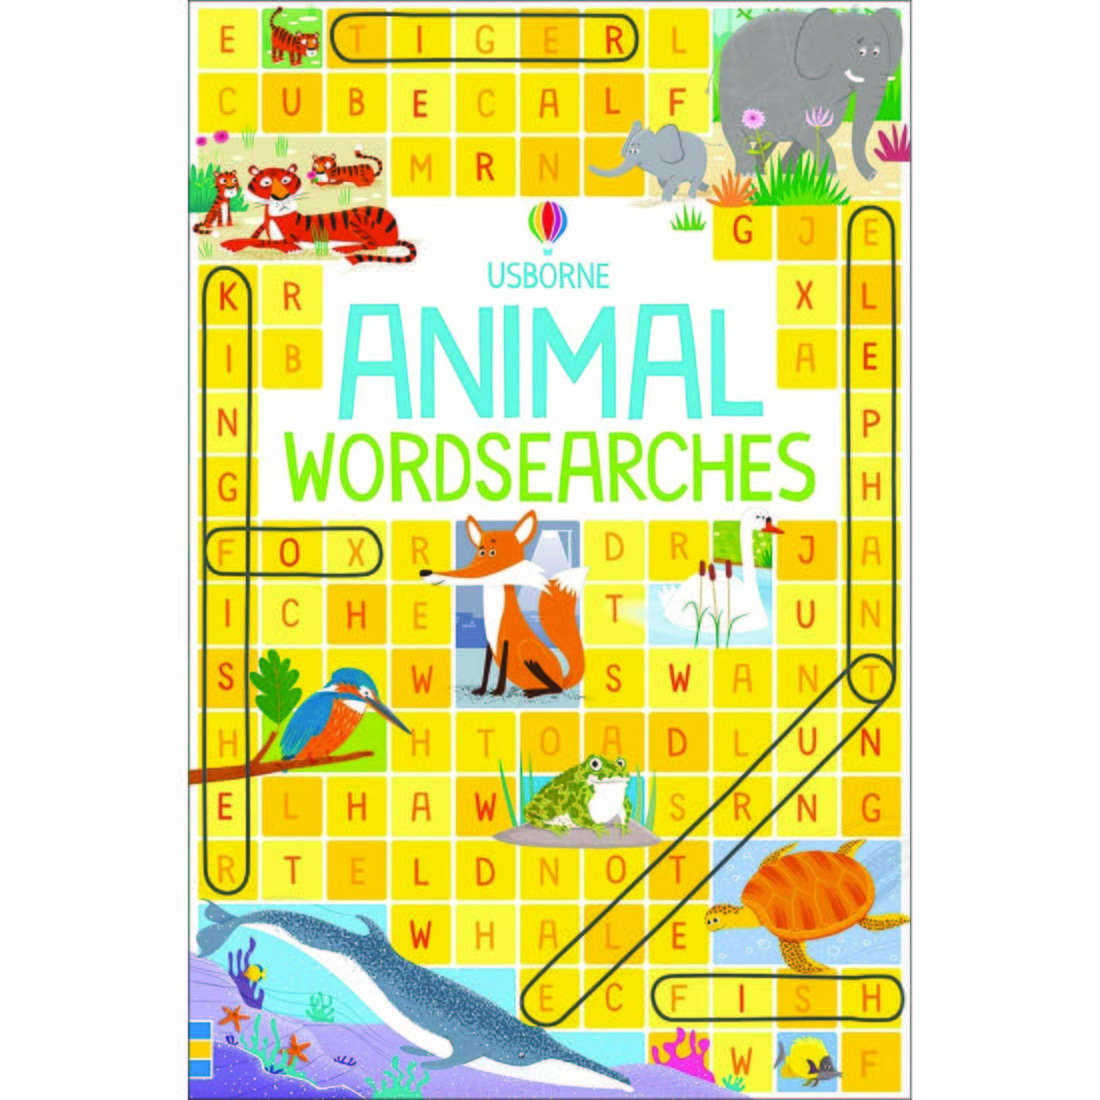 Wordsearches Cover